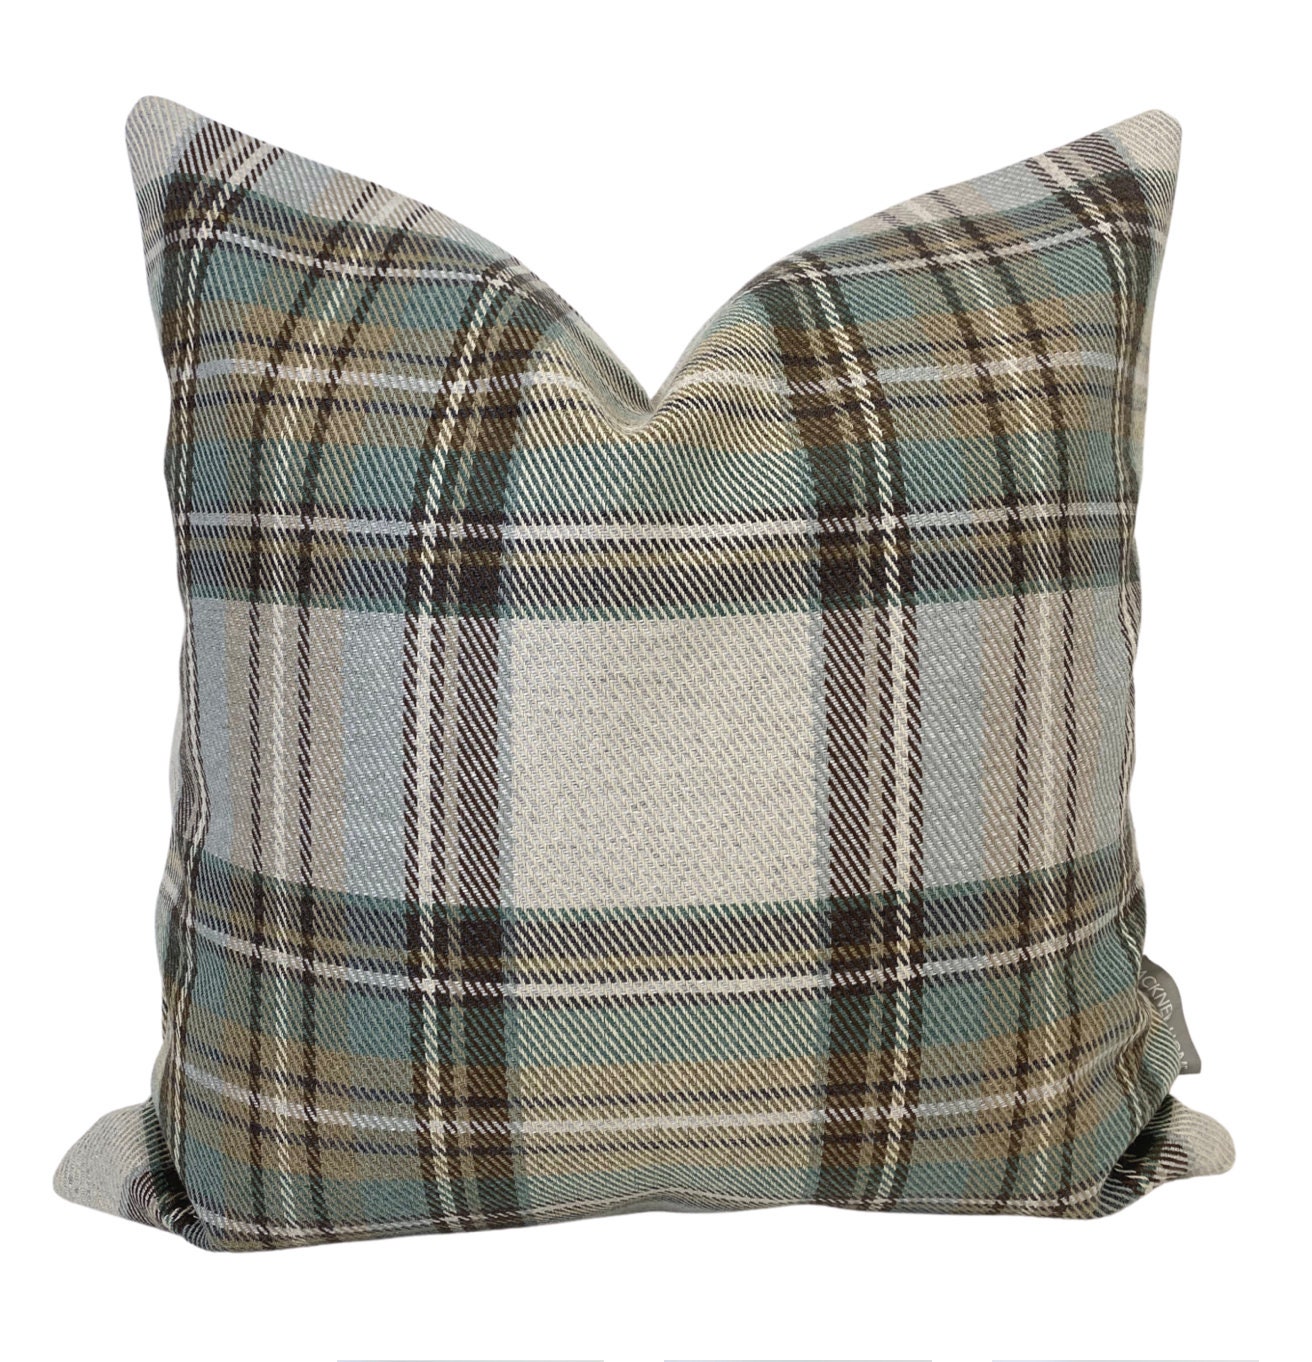 Green Plaid 18x18 Hand Woven Filled Pillow - Foreside Home